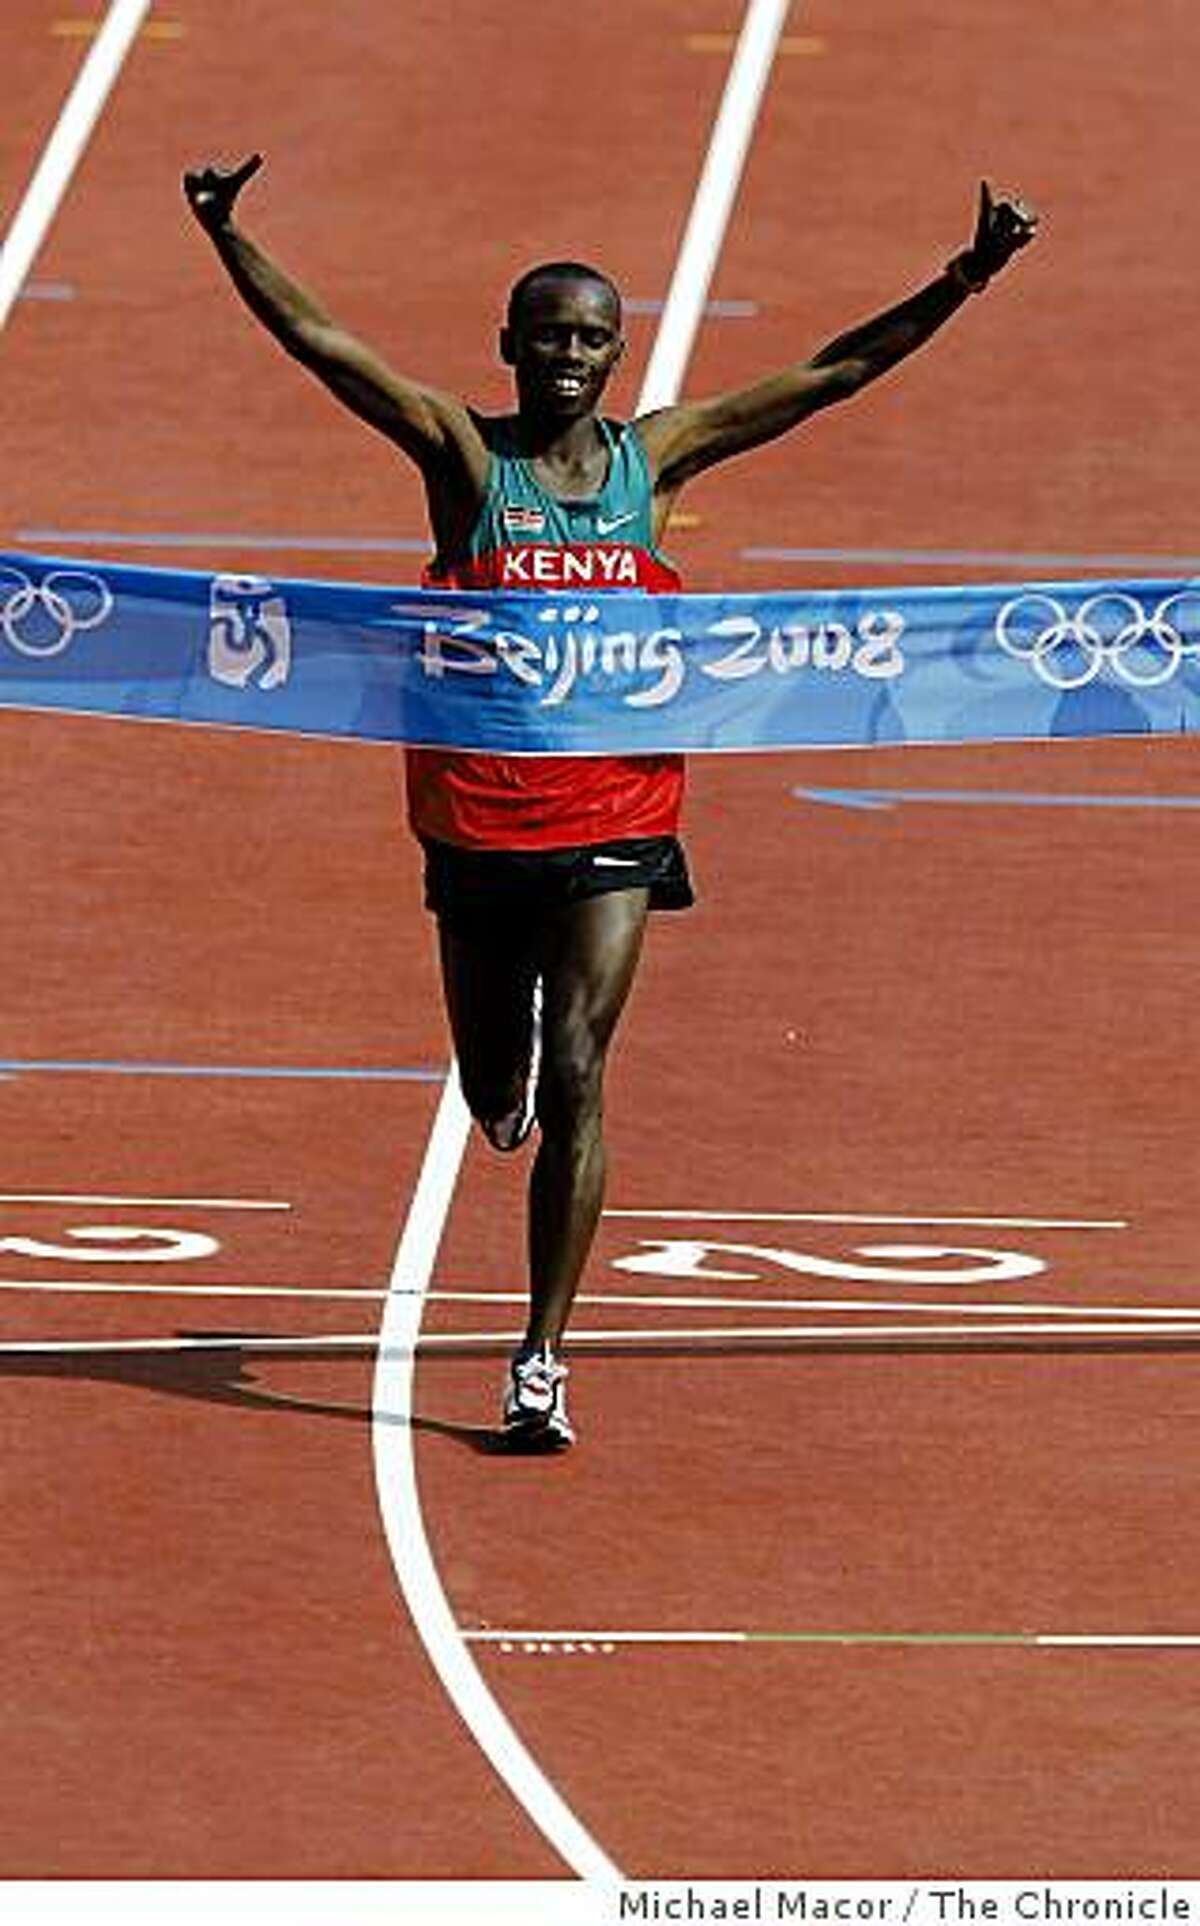 Kenya's, Samuel Kamau Wansiru crosses the line first with a time of 2:06.32 to take the gold medal in the men's Marathon race, at the 2008 Olympic games in Beijing, China on Sunday Aug. 24, 2008.